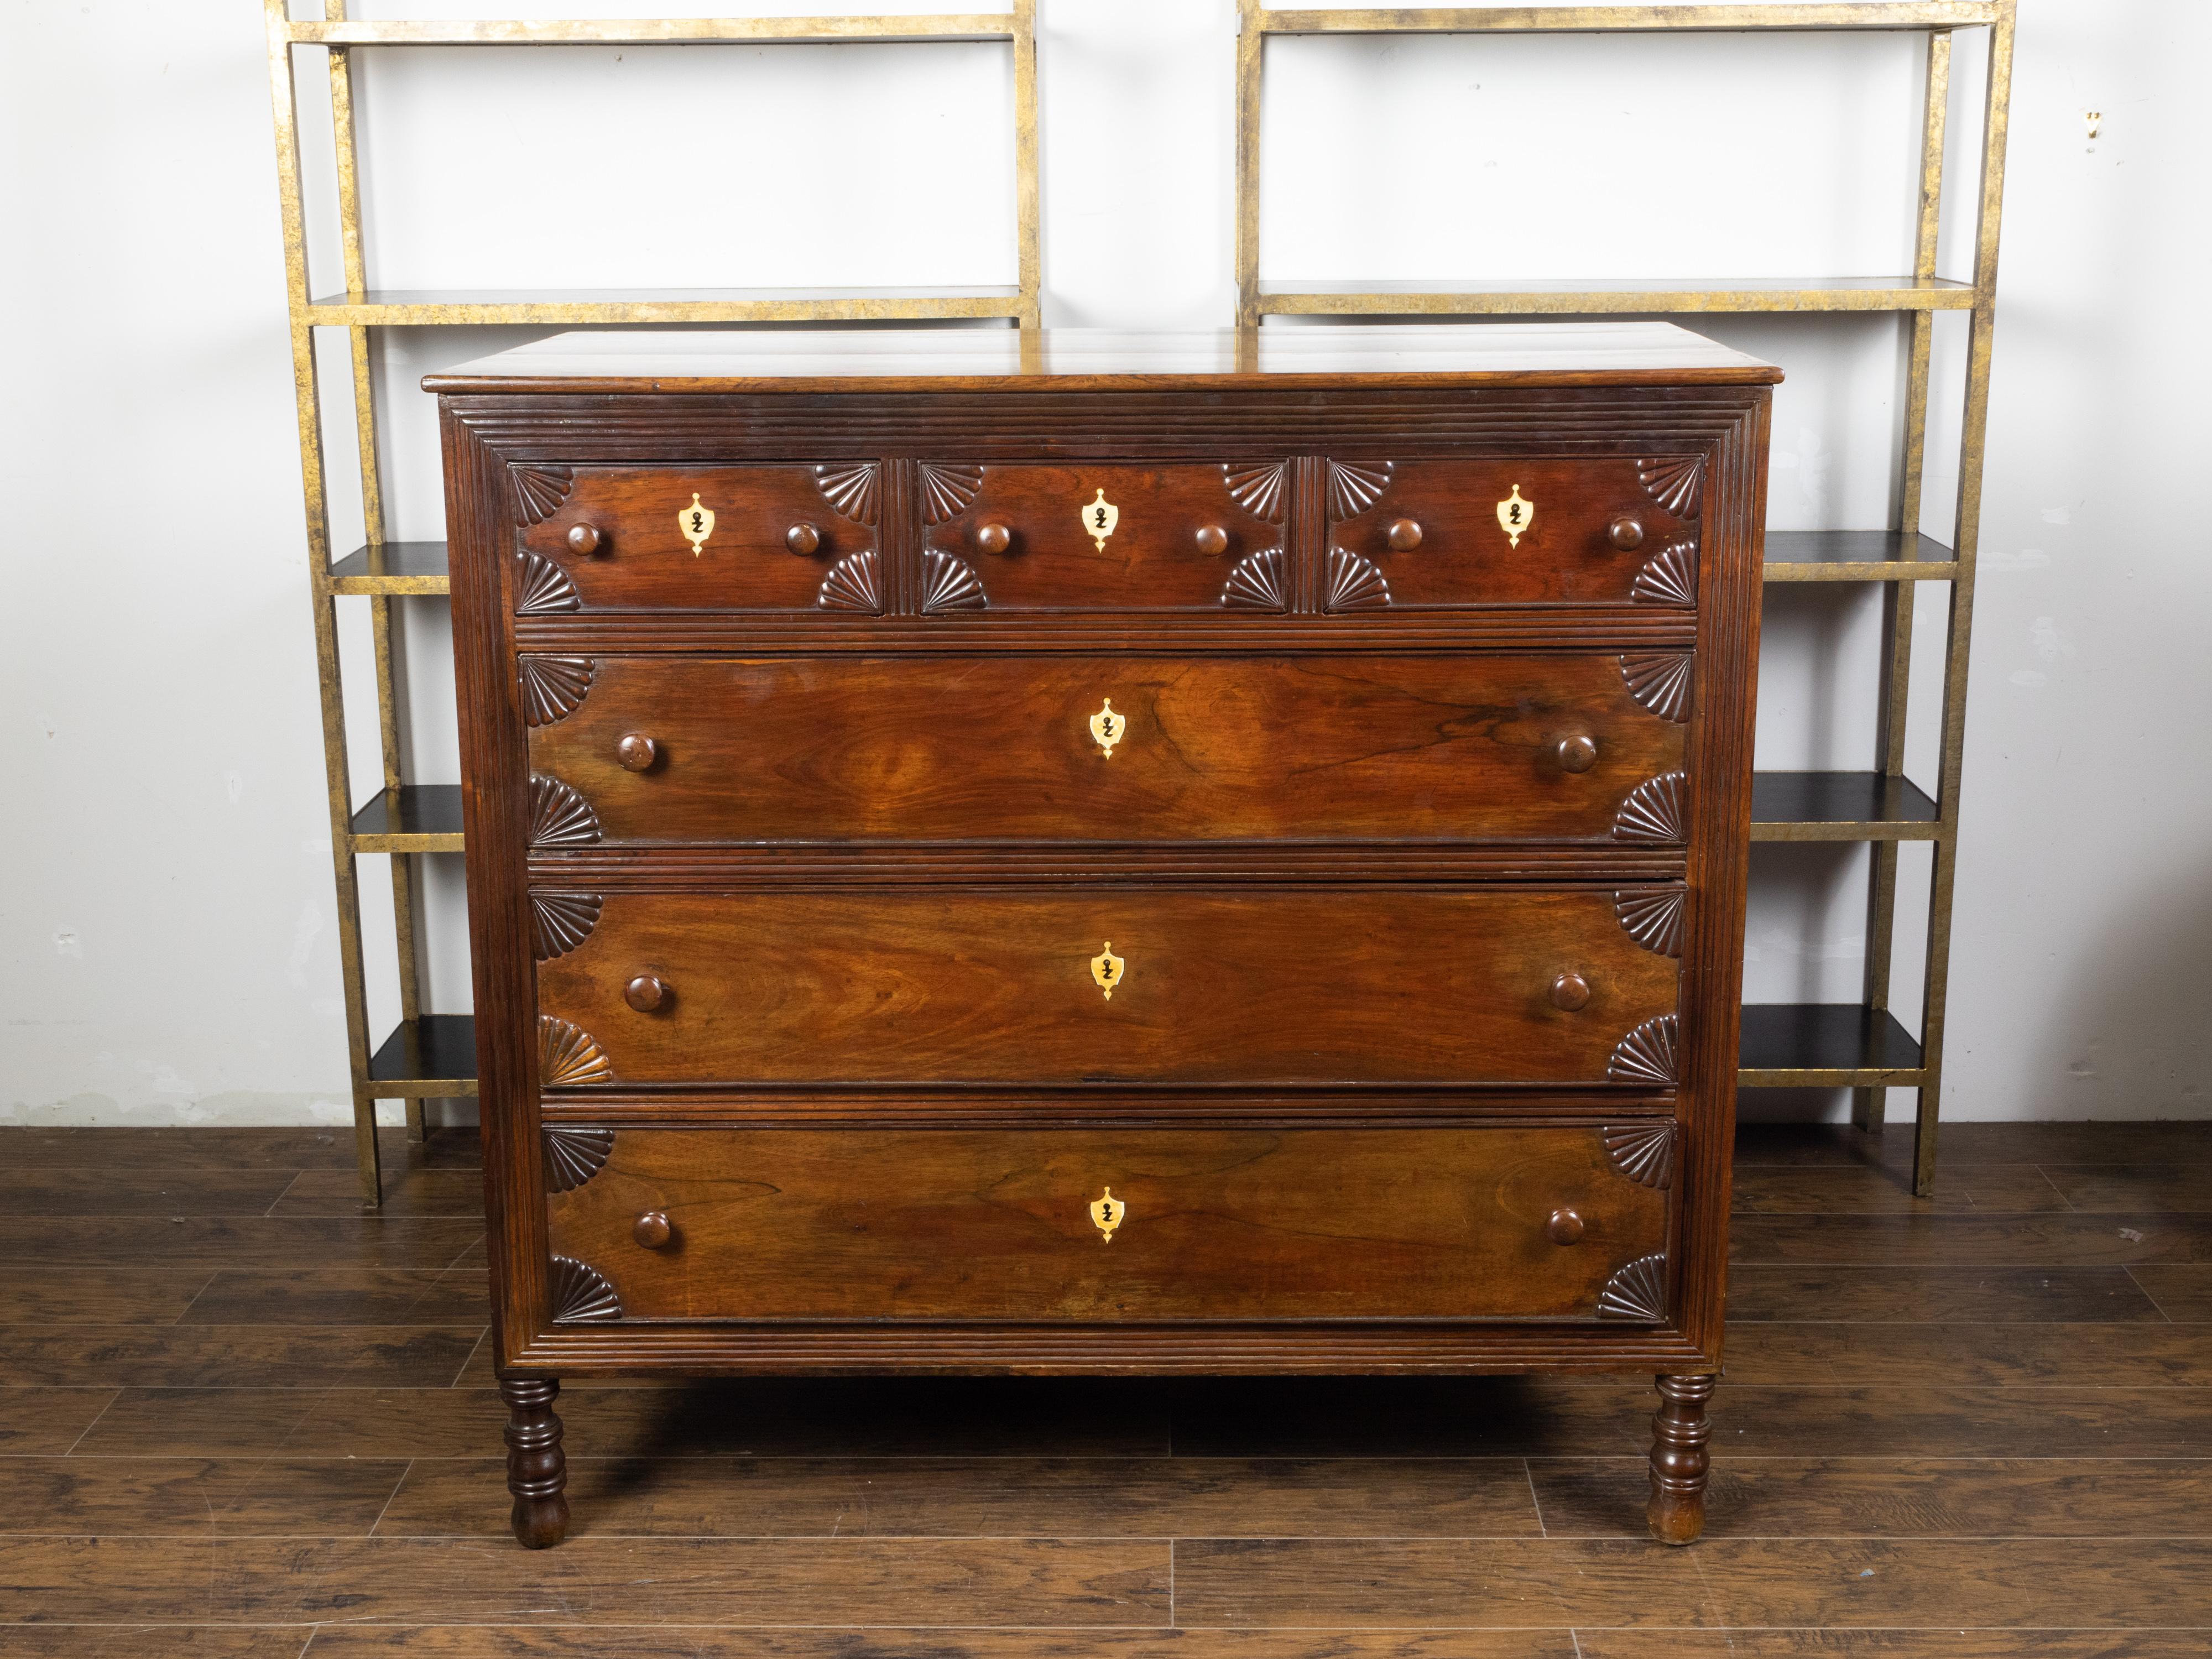 An Anglo-Indian six-drawer chest from the early 19th century with radiating fan motifs and bone inlay. Created during the early years of the 19th century, this chest features a rectangular top sitting above a perfectly organized façade adorned with